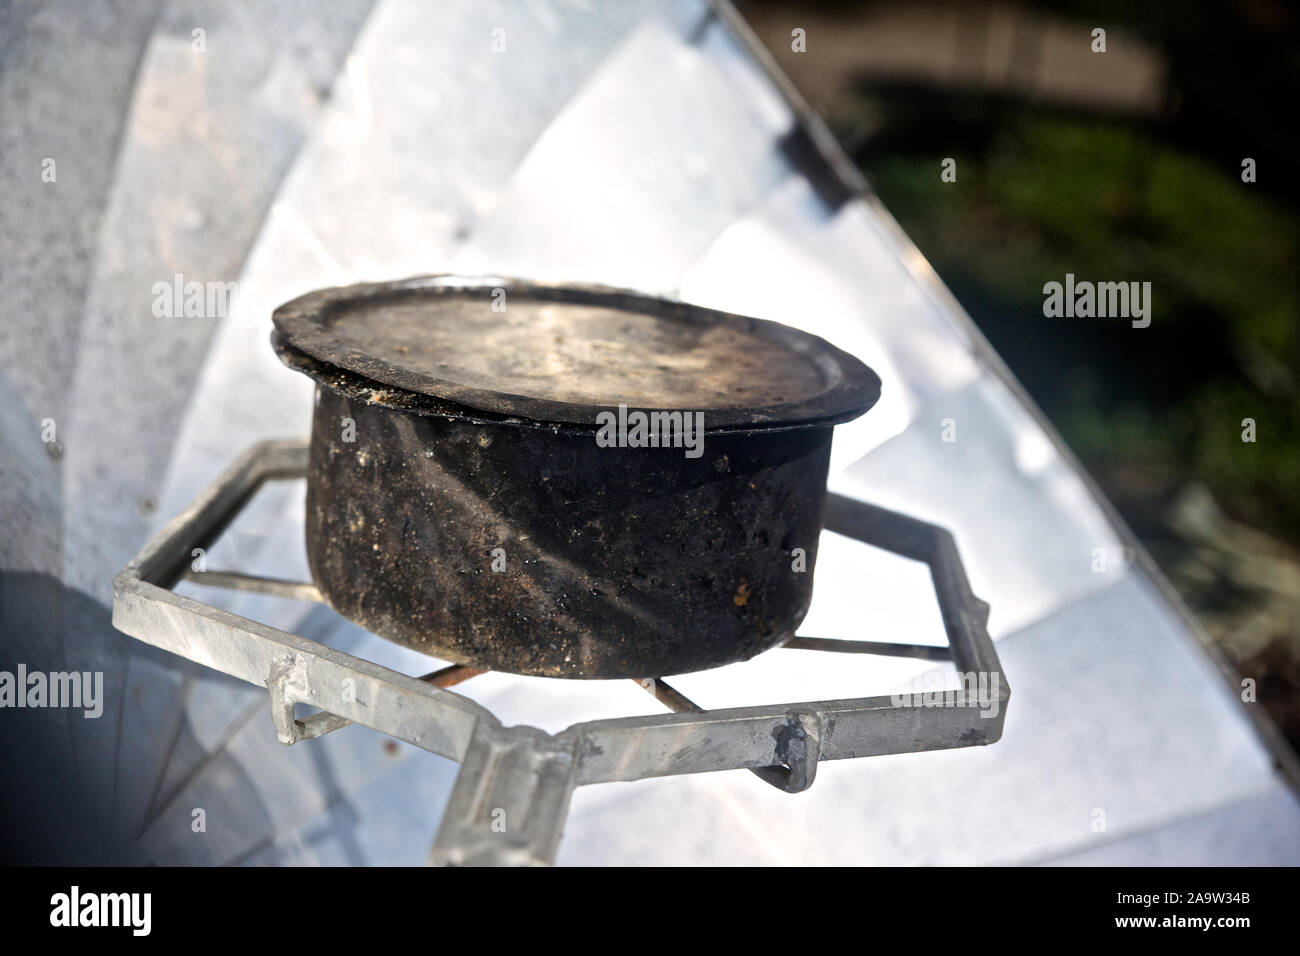 - Beldangi II, Damak, Nepal, 2014: The UNHCR along with The Vajra Foundation, provides parabolic solar cookers for cooking purposes to the refugees in the camp. ..4 November 2014 Stock Photo